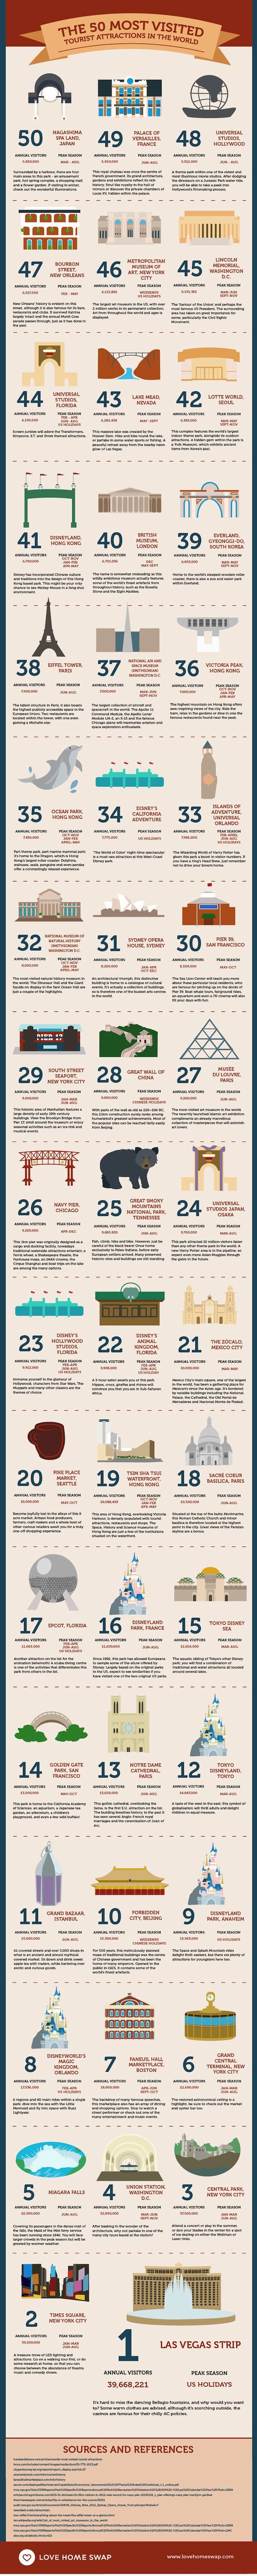 most visited travel attractions in the world